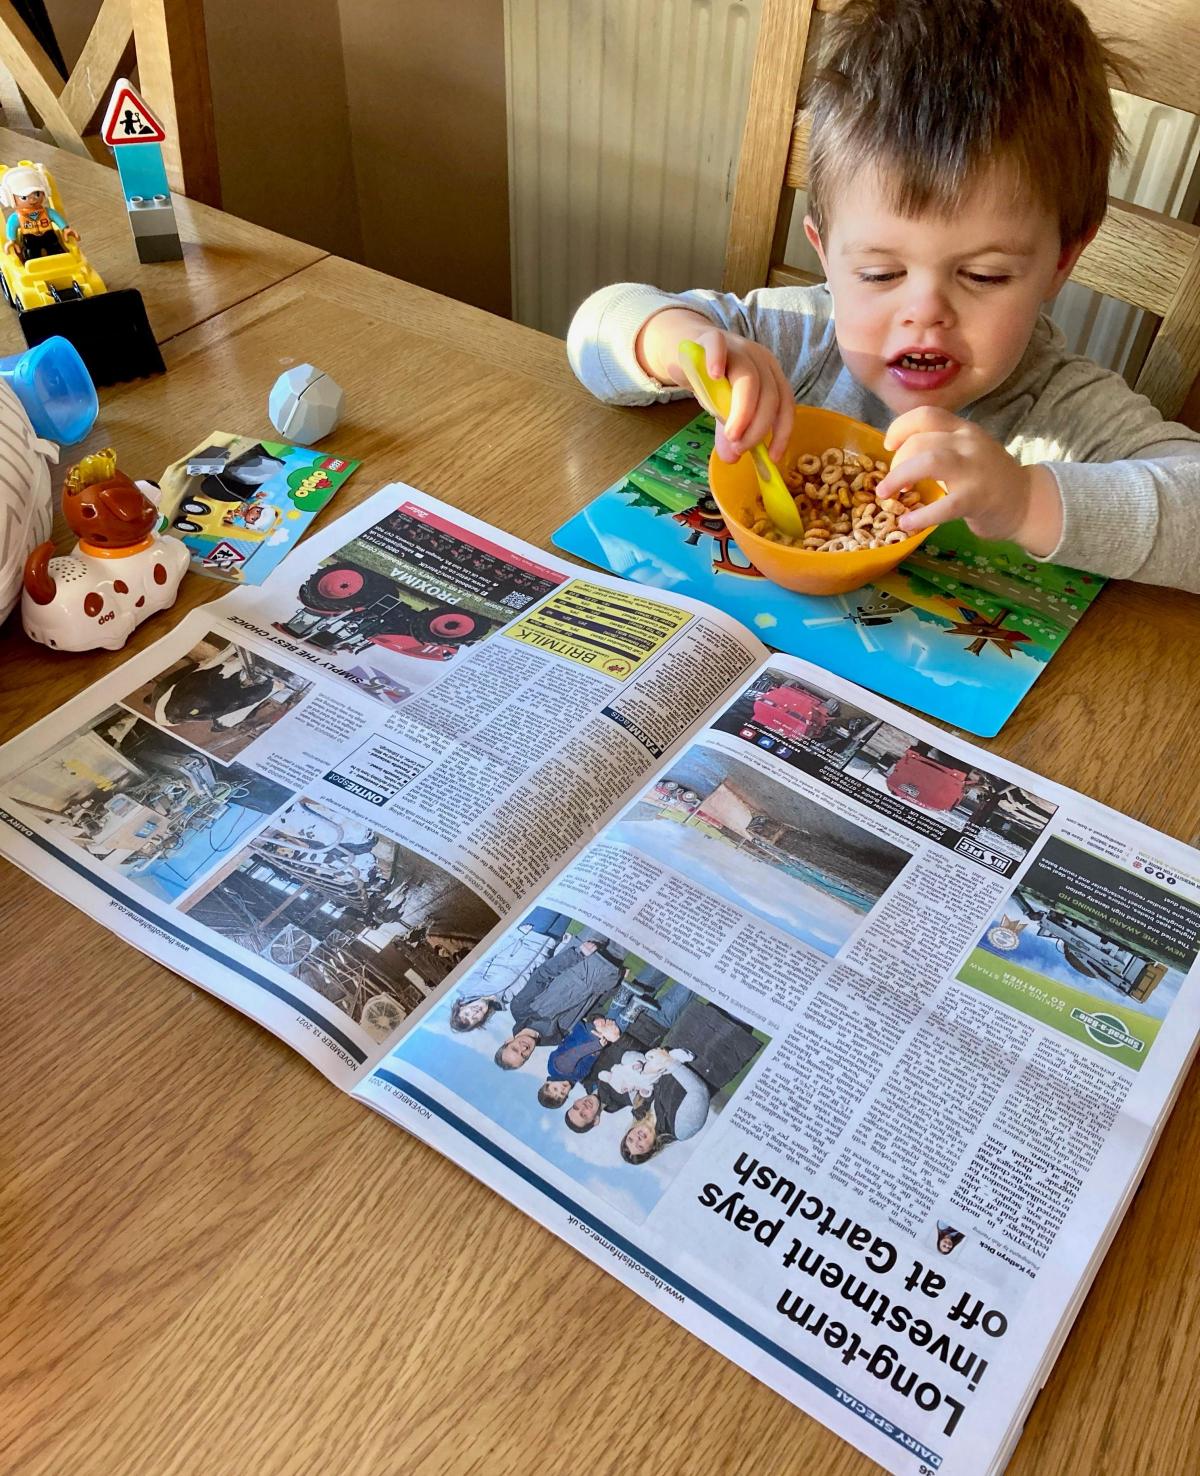 Lisa Brisbane - Rory (age 2) loved seeing his photo in Fridays edition of the Scottish Farmer.